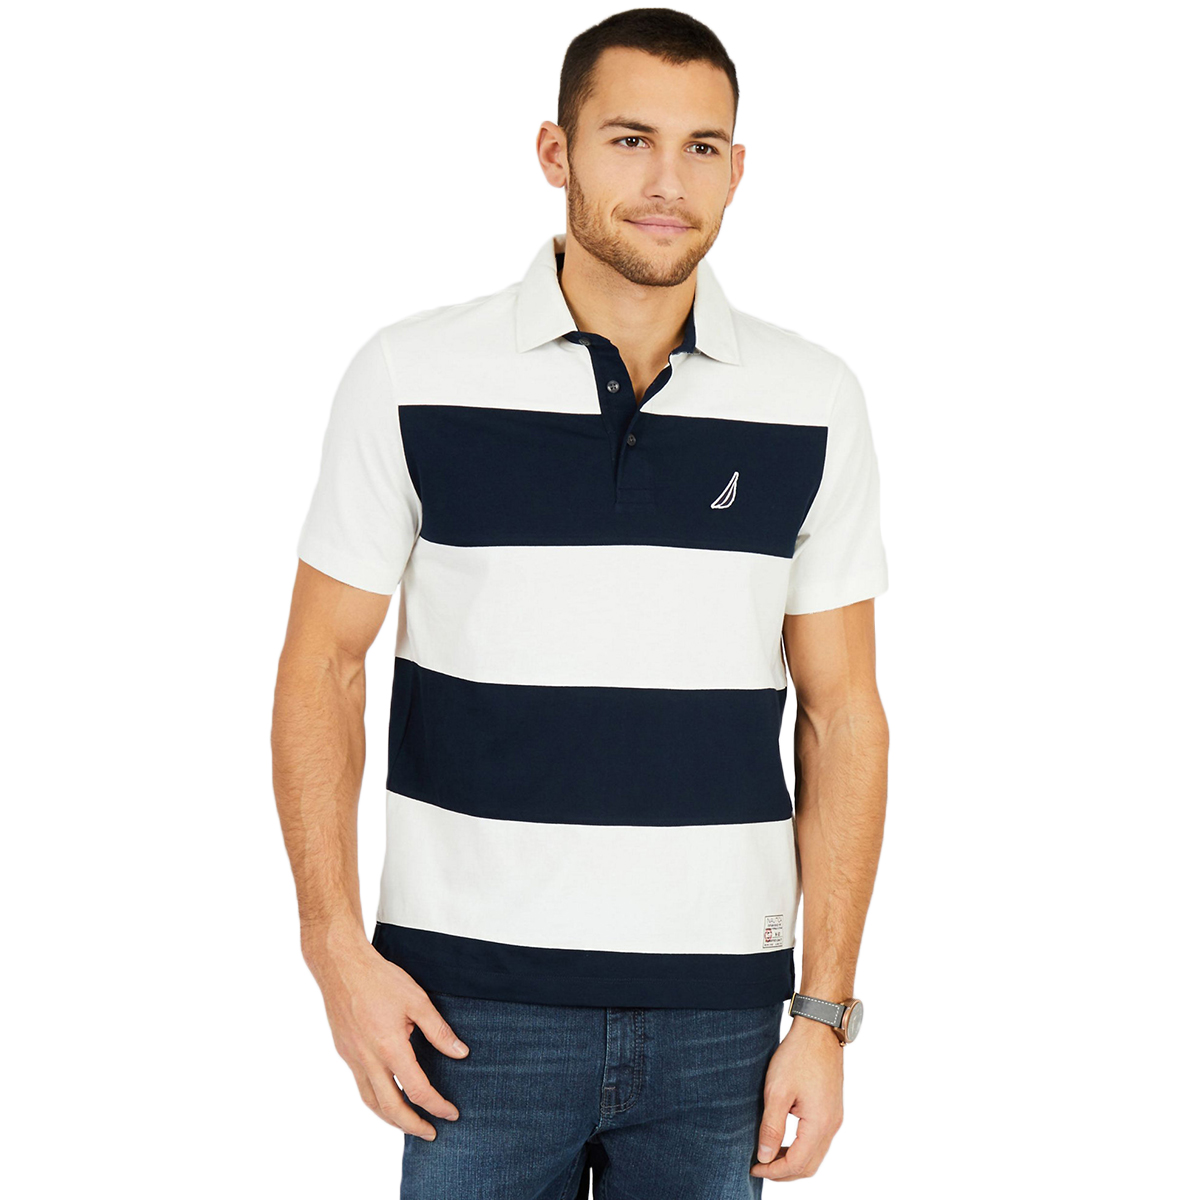 Nautica Men's Short Sleeve Classic Fit Rugby Stripe Polo Shirt - White, M